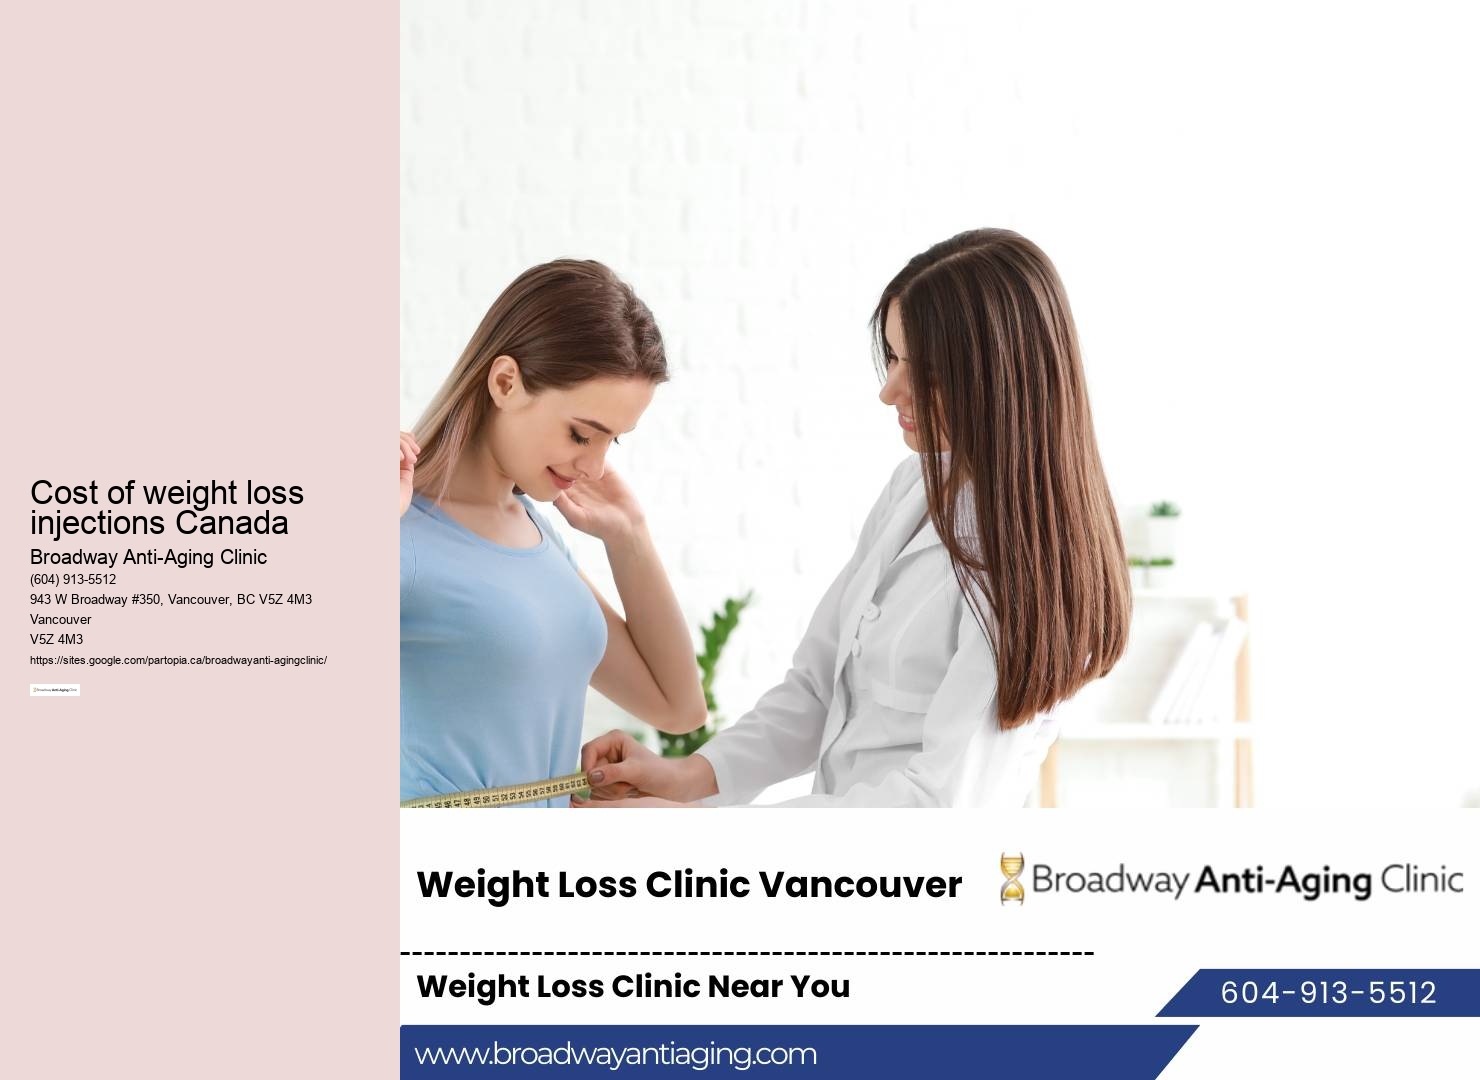 Cost of weight loss injections Canada